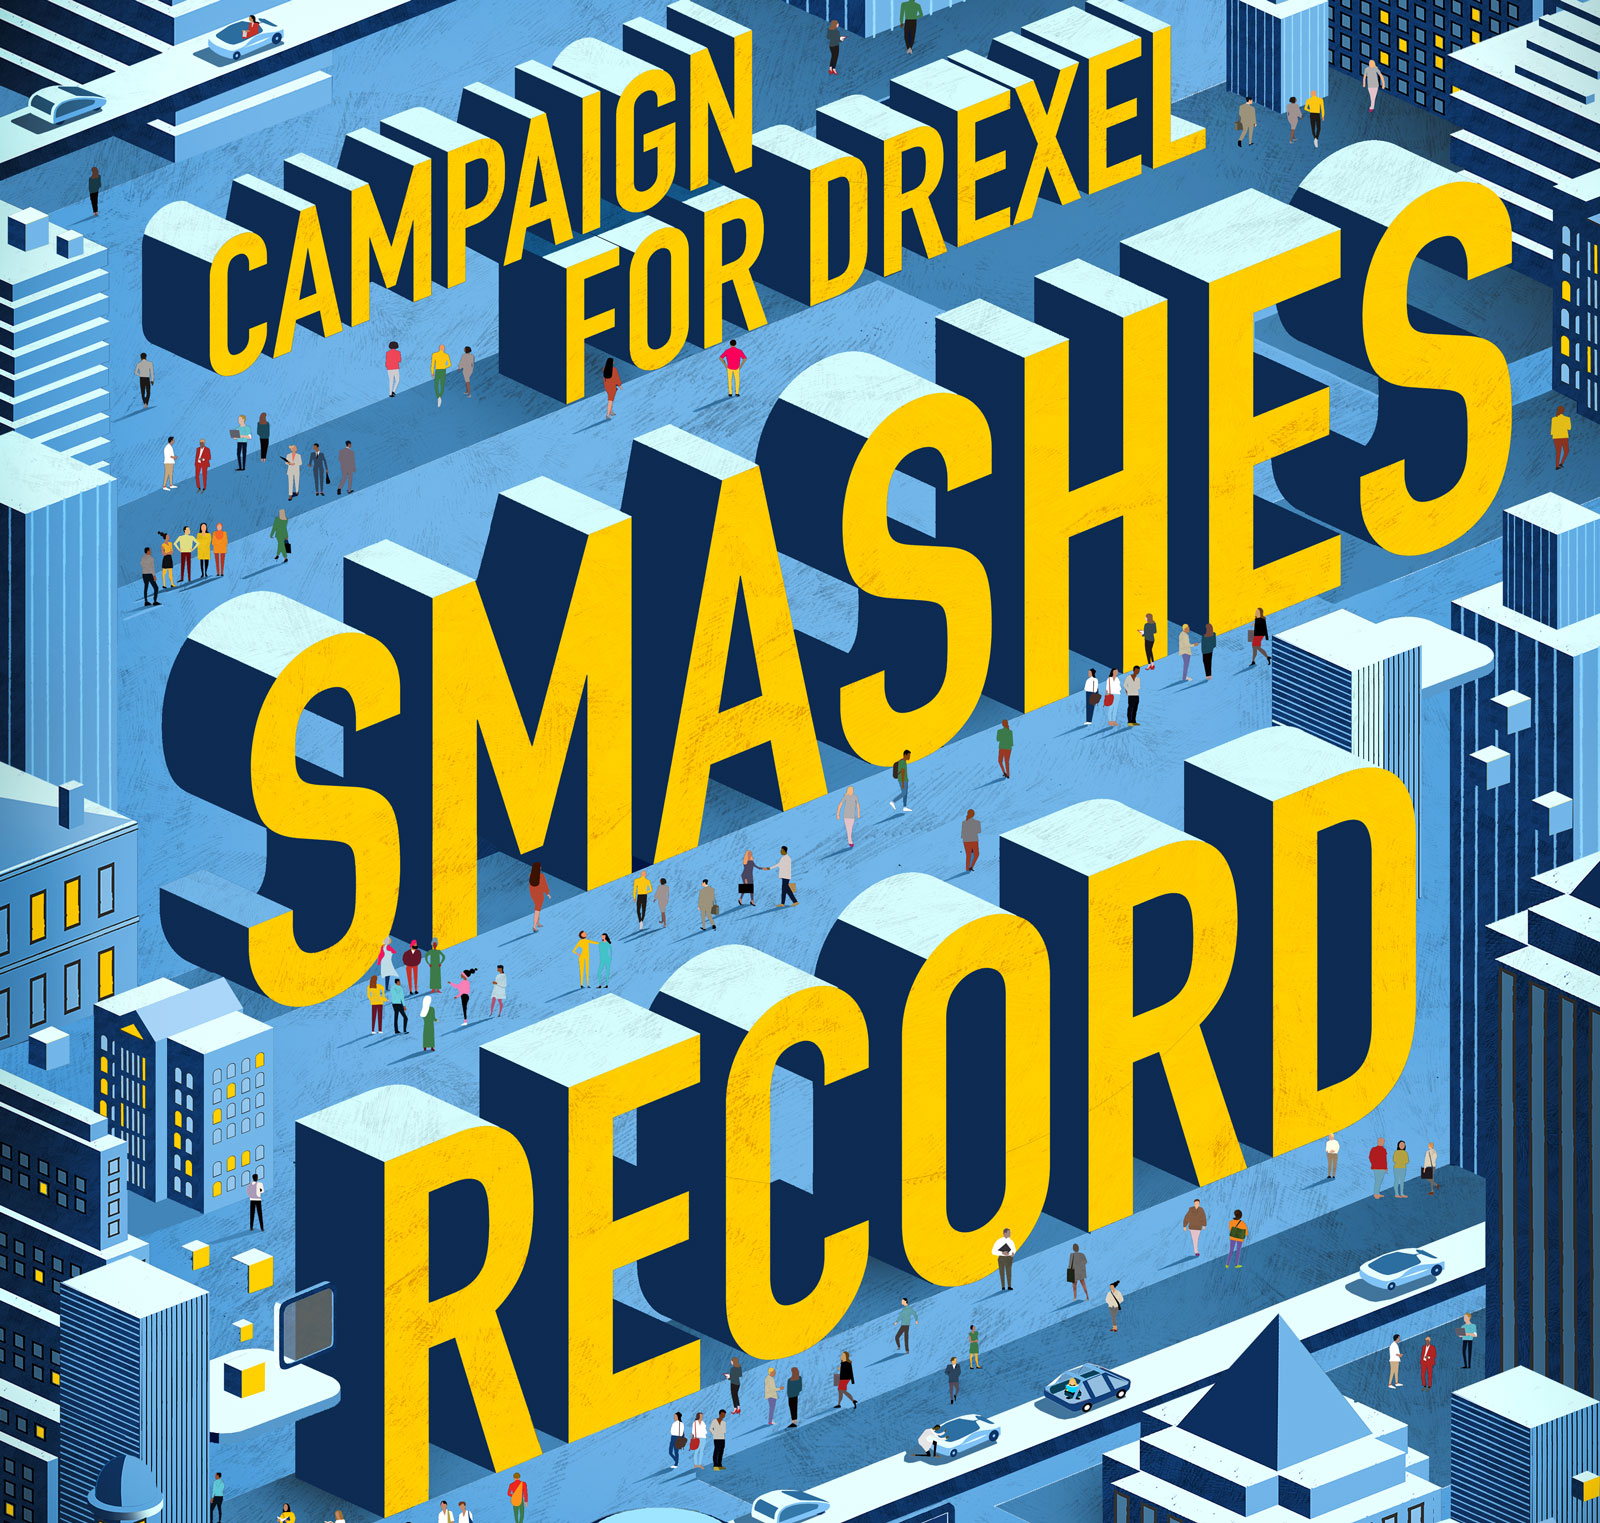 Campaign for Drexel Smashes Record